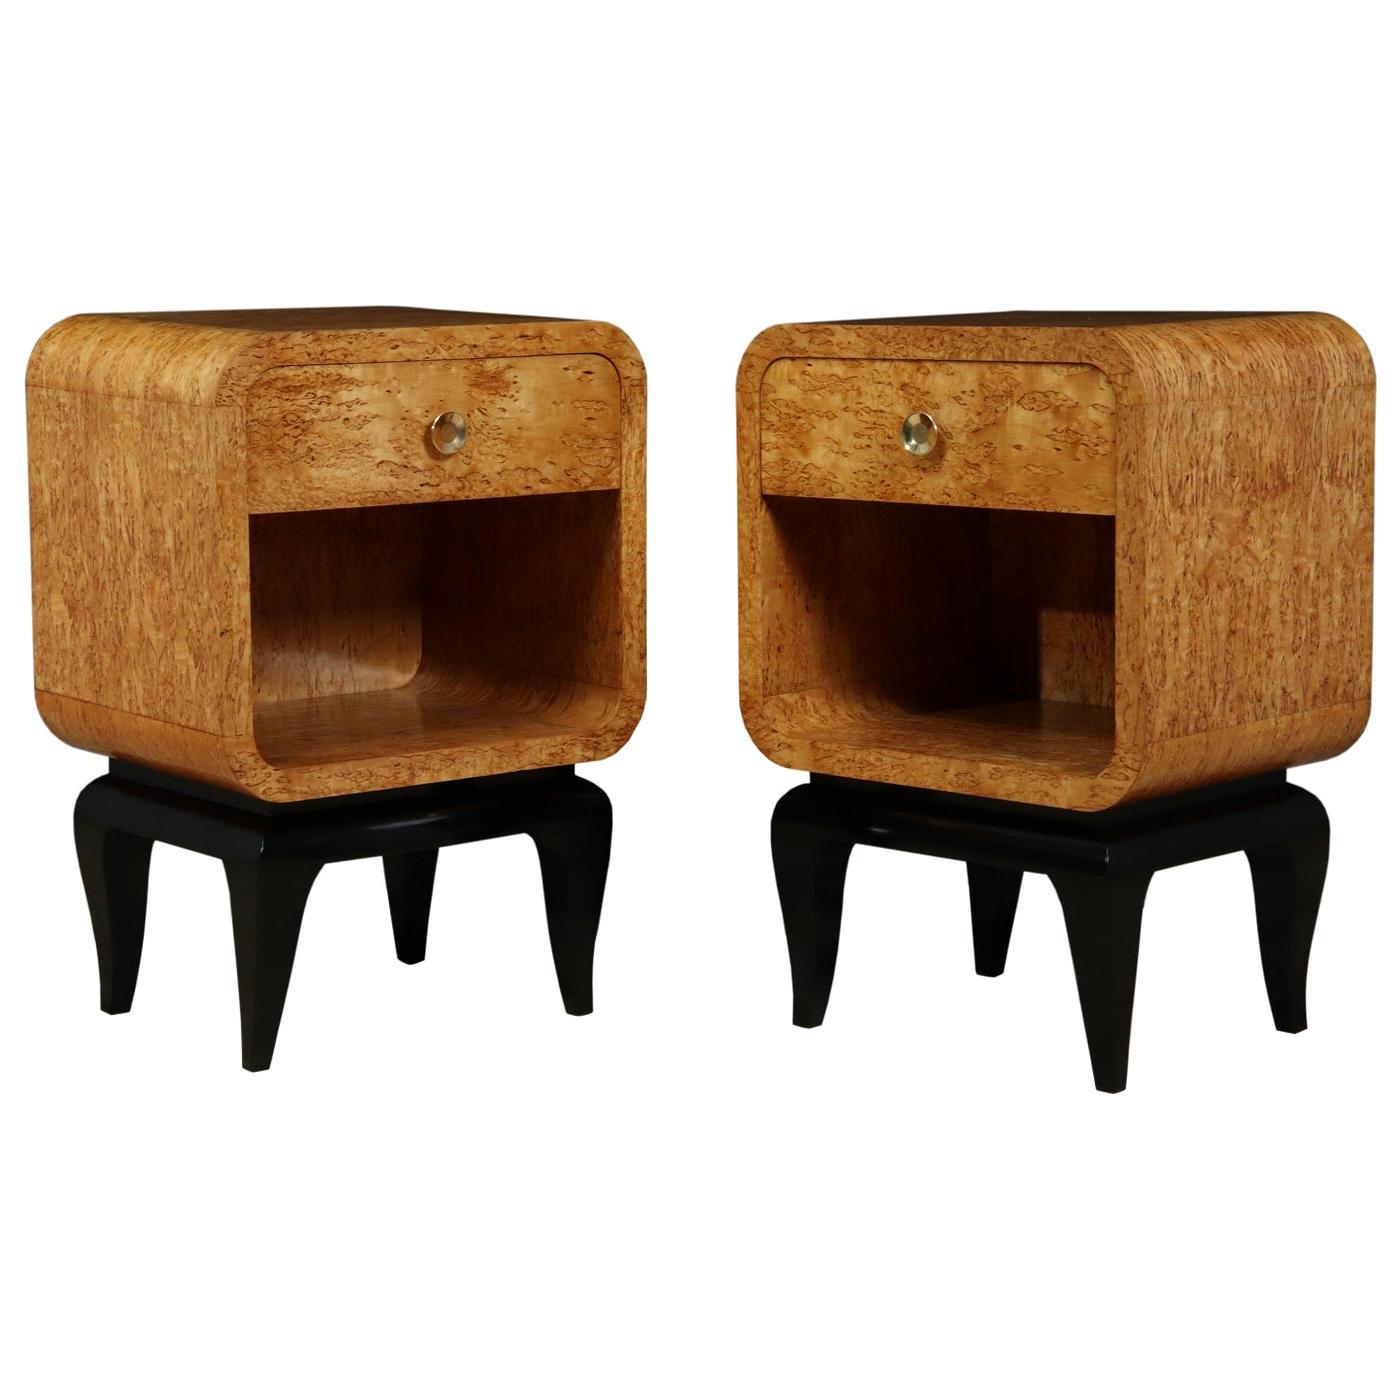 Pair of French Art Deco Bedside Tables